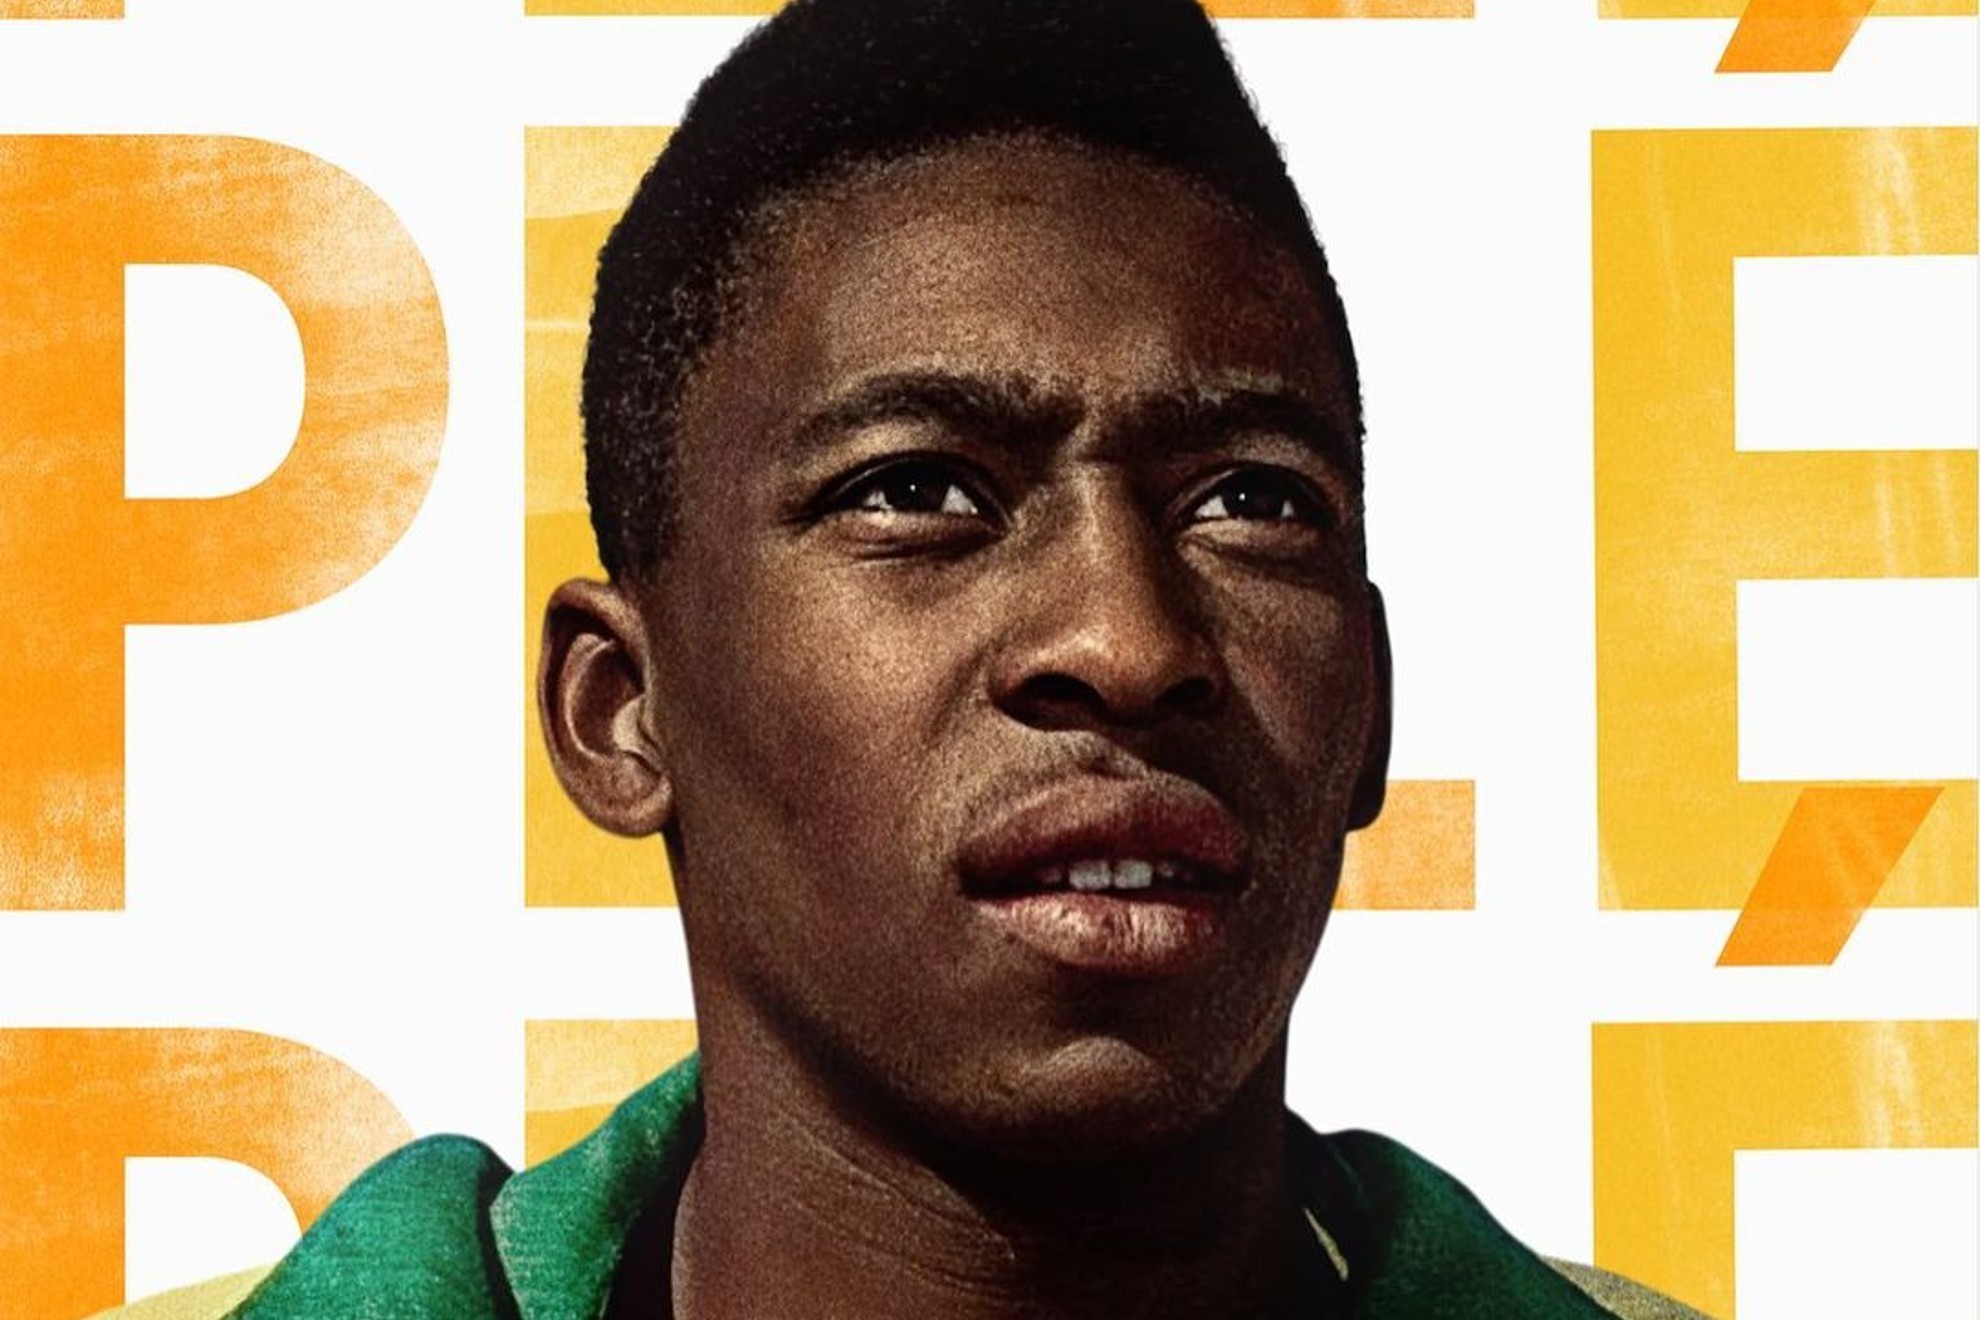 Poster of the Netflix series 'Pele'.